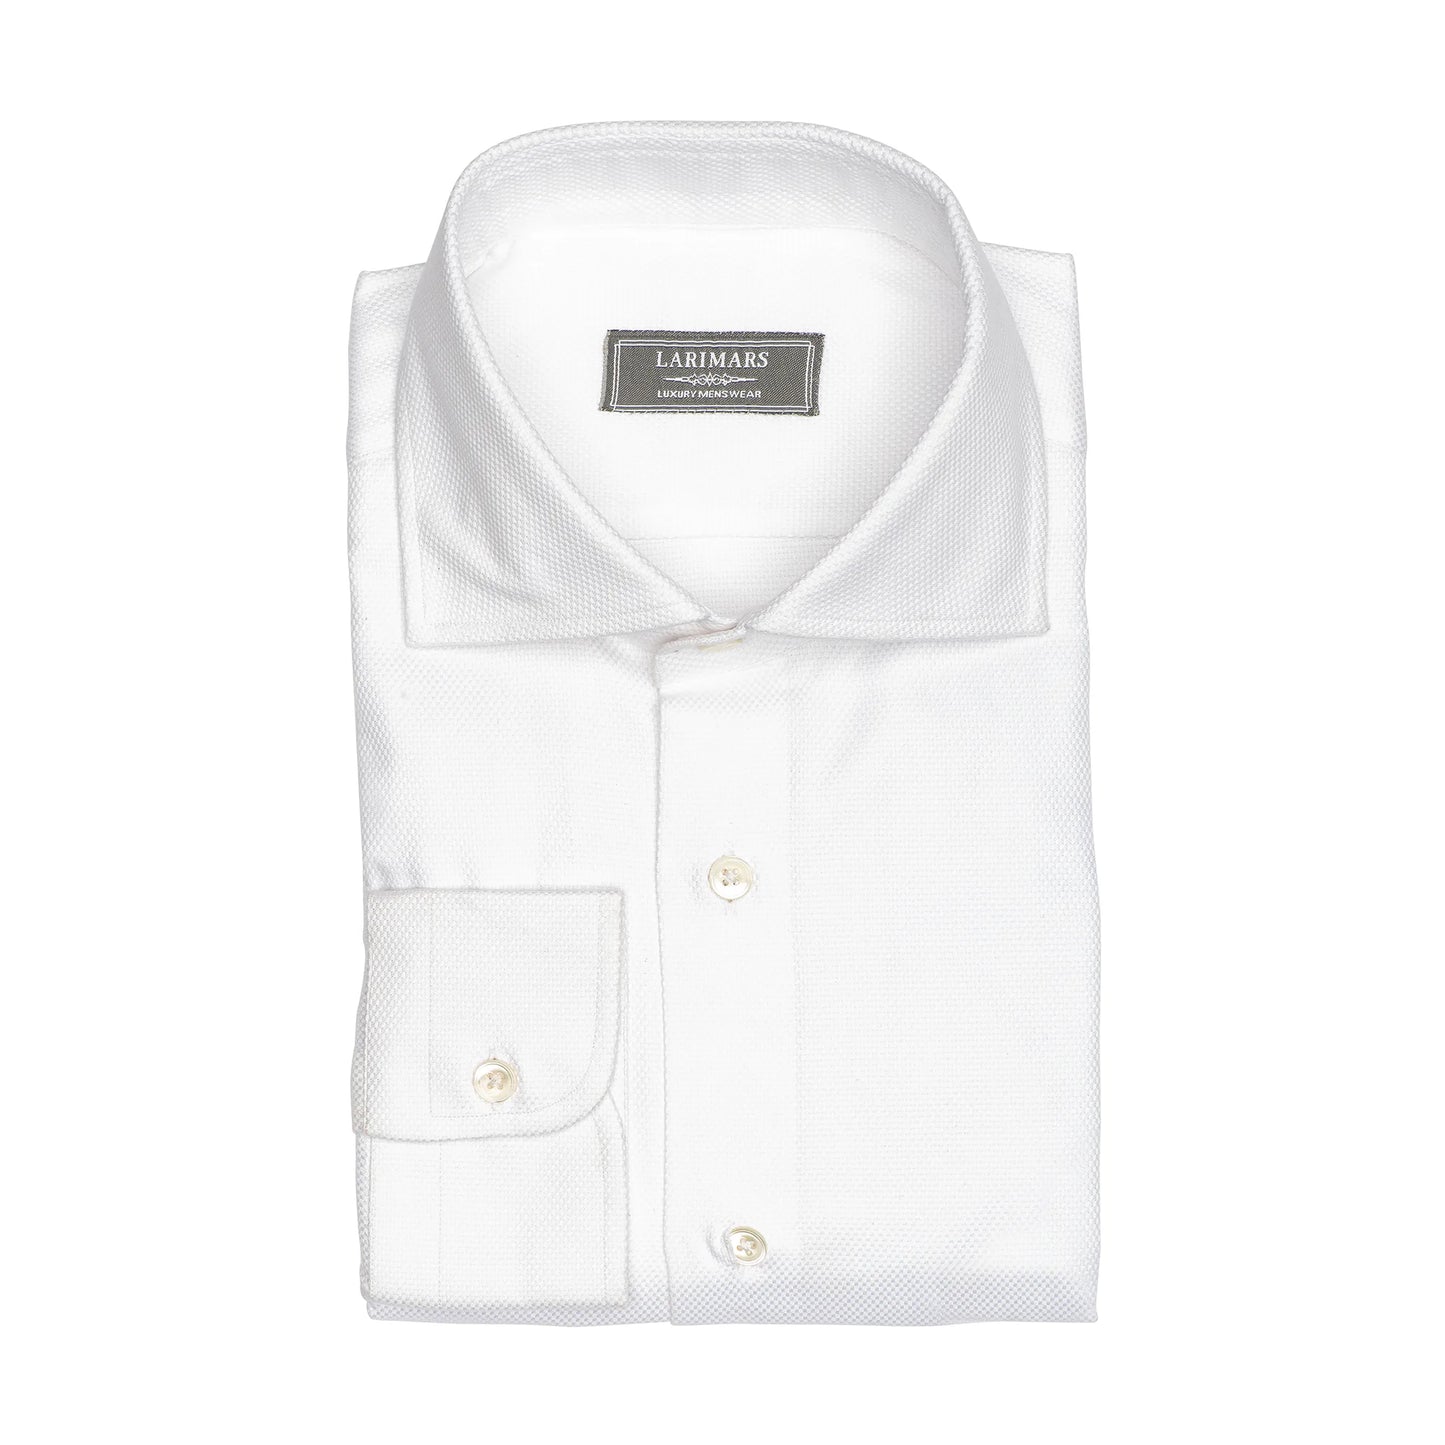 White Dobby Texture - Larimars Clothing Men's Formal and casual wear shirts